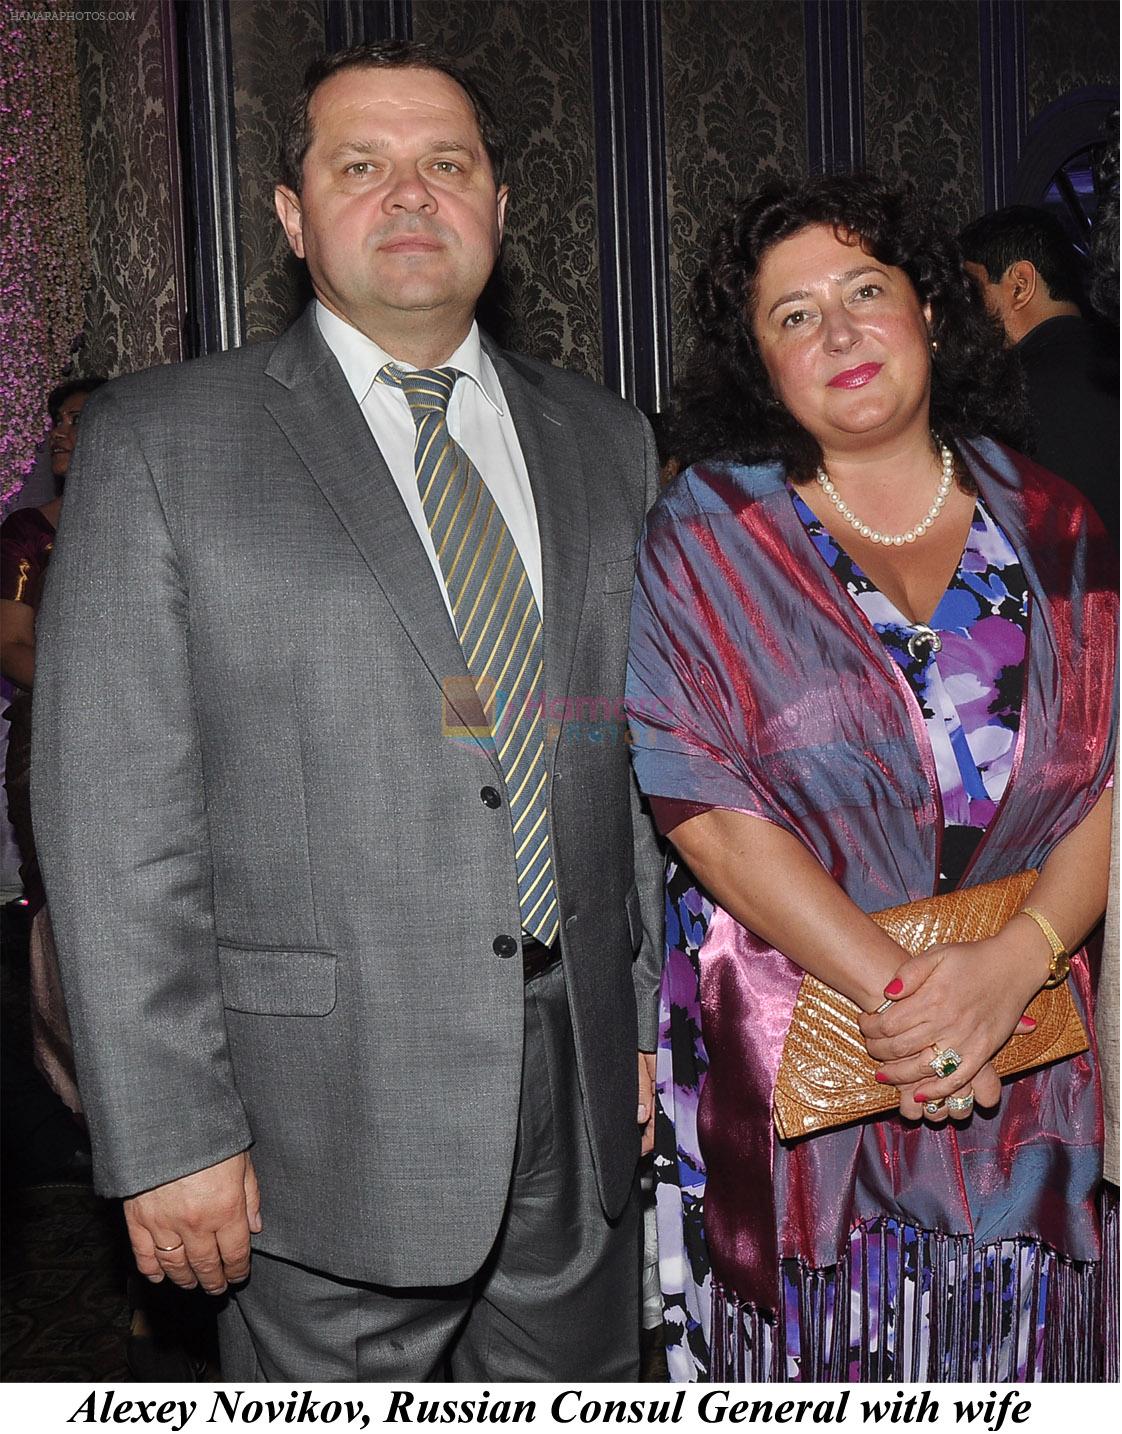 Alexey Novikov, Russian Consul General with wife at the Engagement ceremony of Arjun Hitkari with Gayatri on 19th April 2012